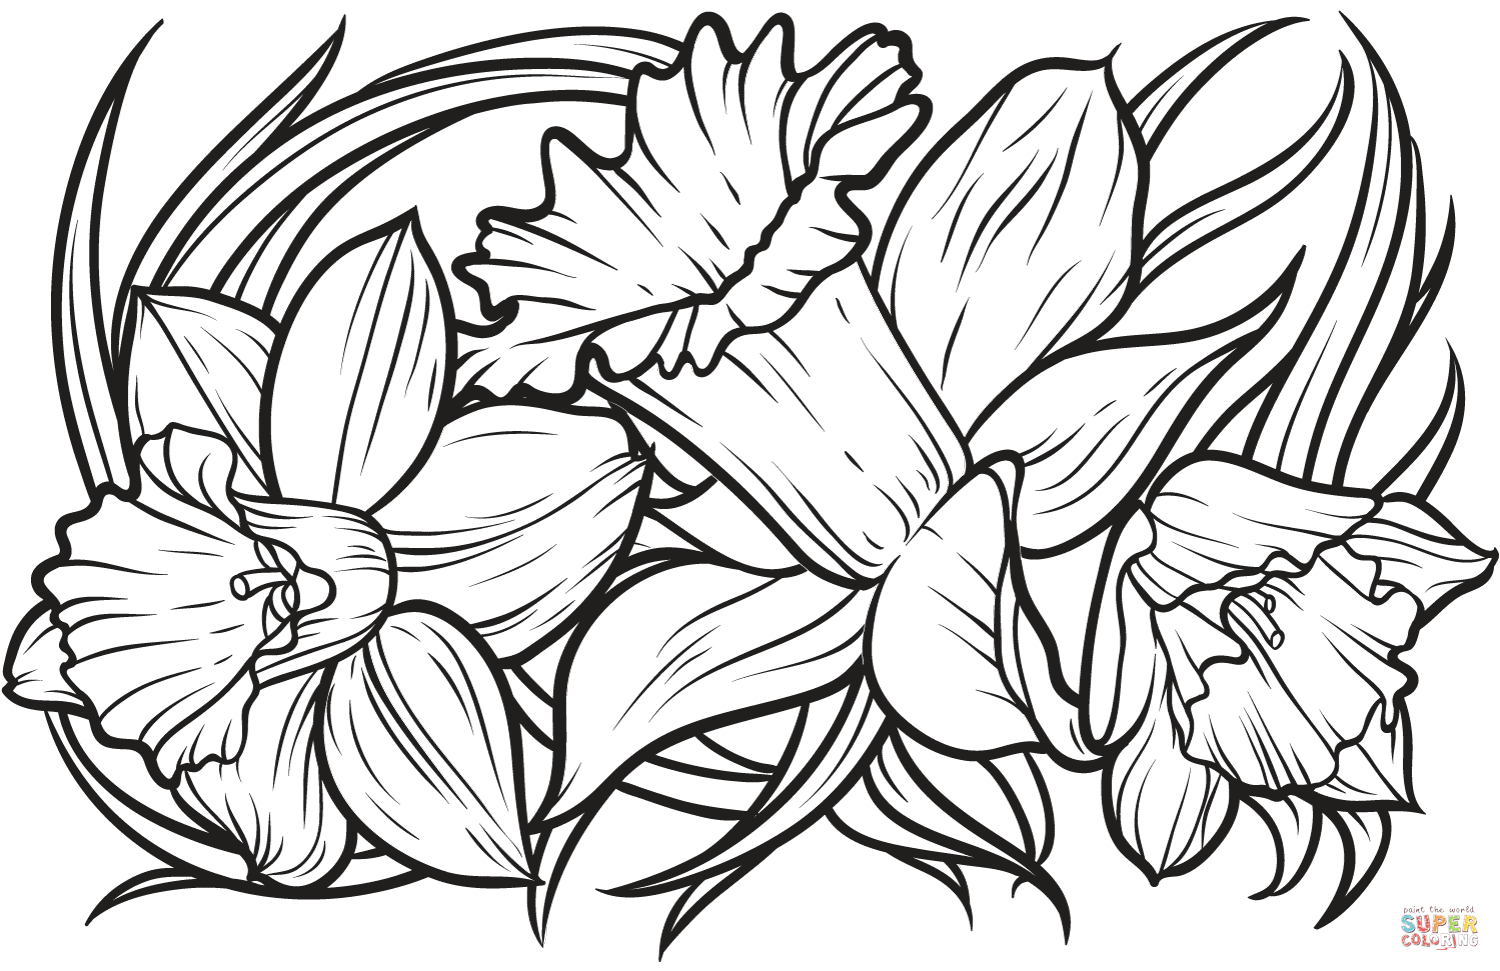 Daffodil coloring page | Free Printable Coloring Pages